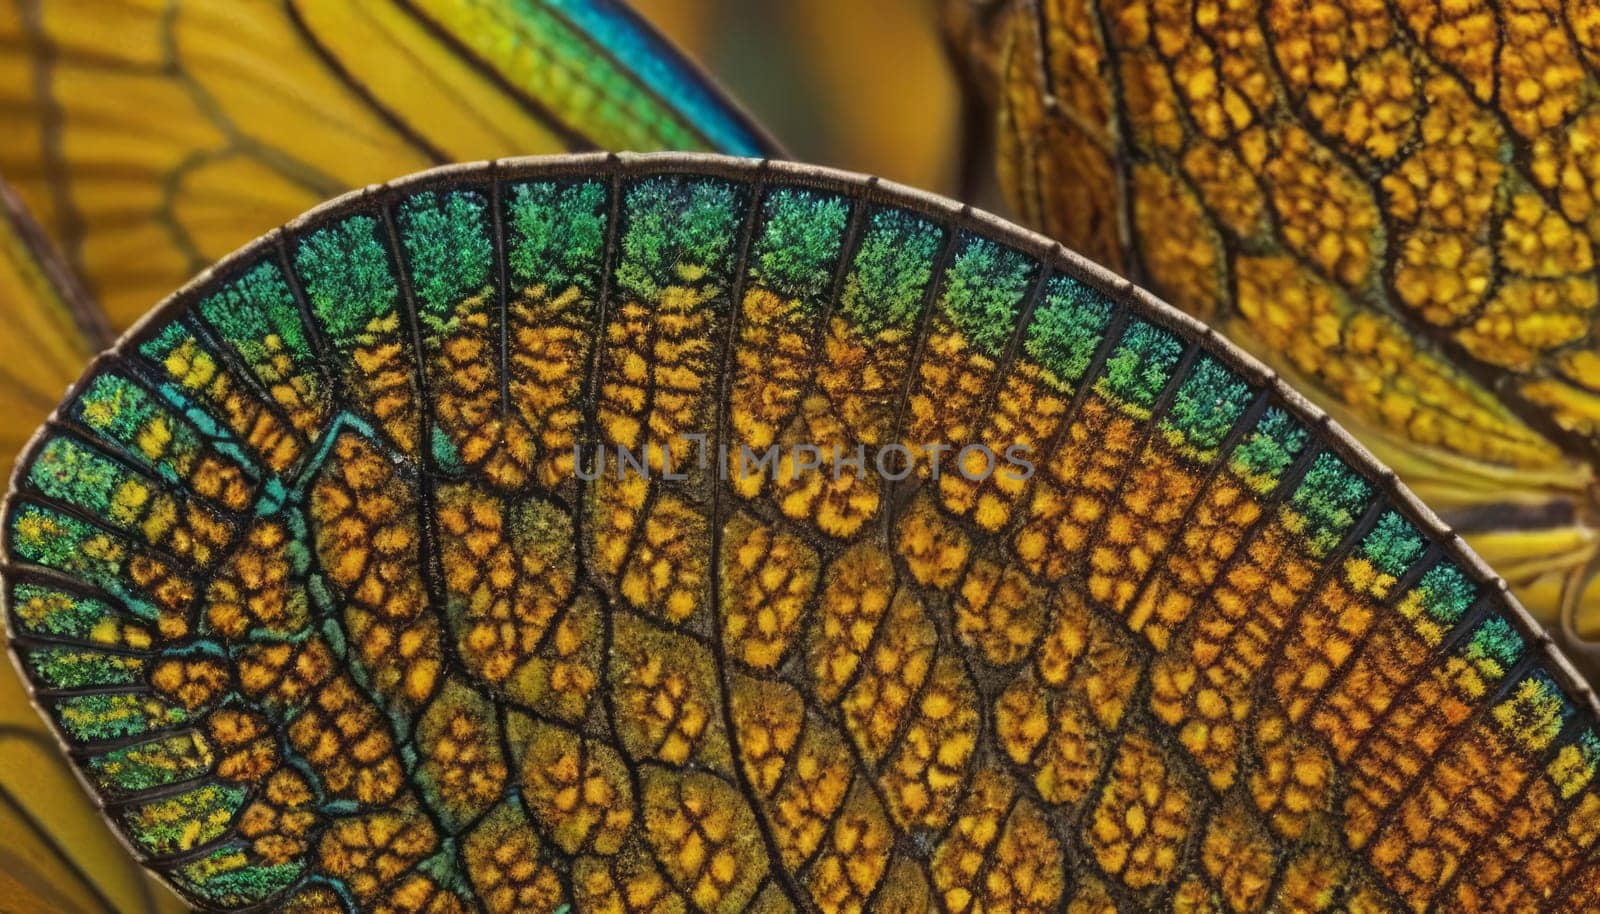 A close-up of a butterfly wing, displaying a rich golden yellow with iridescent green bands and elaborate black markings